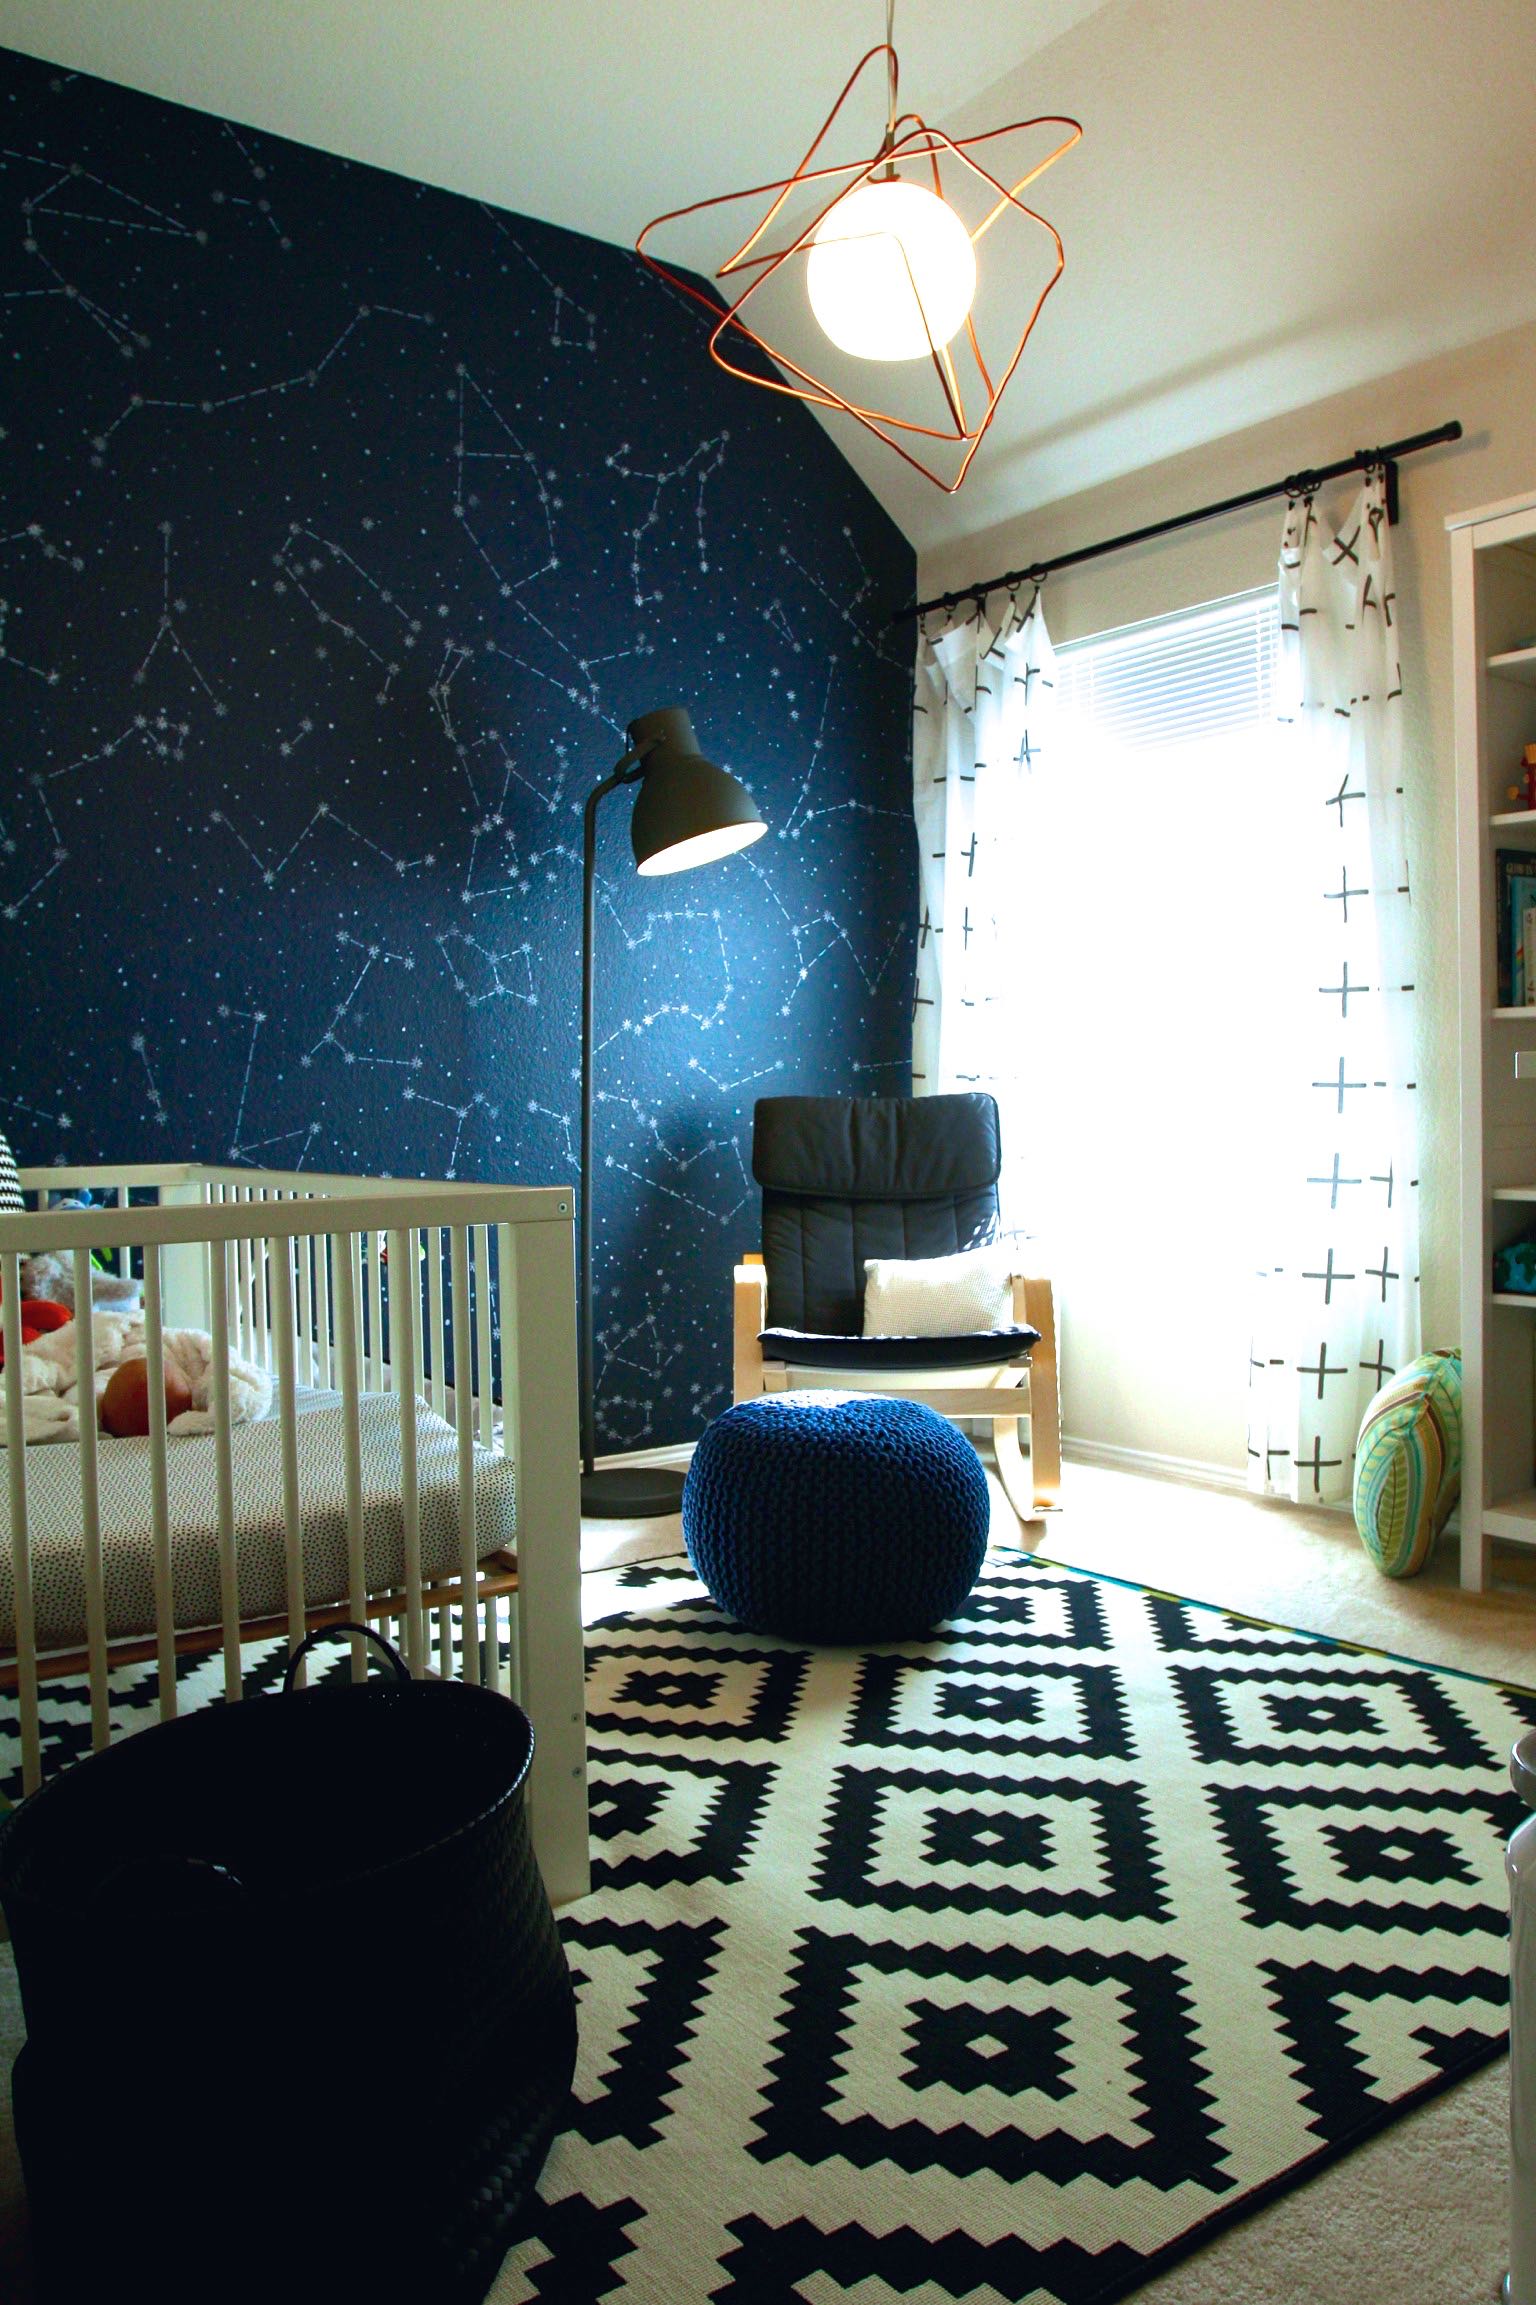 Navy and Gold Space Nursery with Constellation Accent Wall - Project Nursery